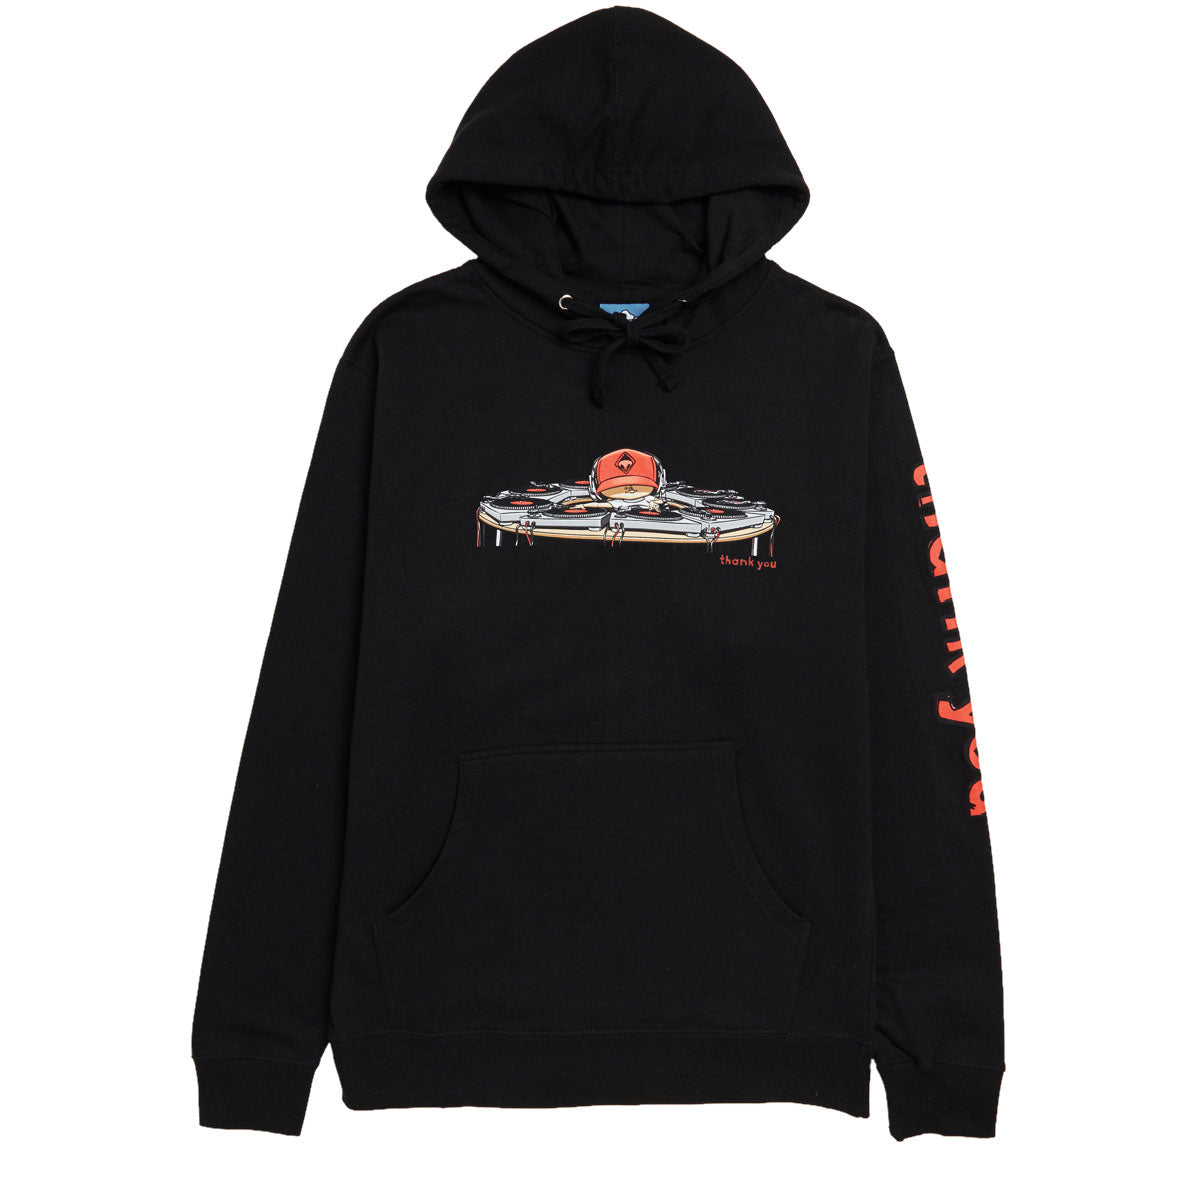 Thank You x Ronnie Creager Mix Master Hoodie - Black image 1